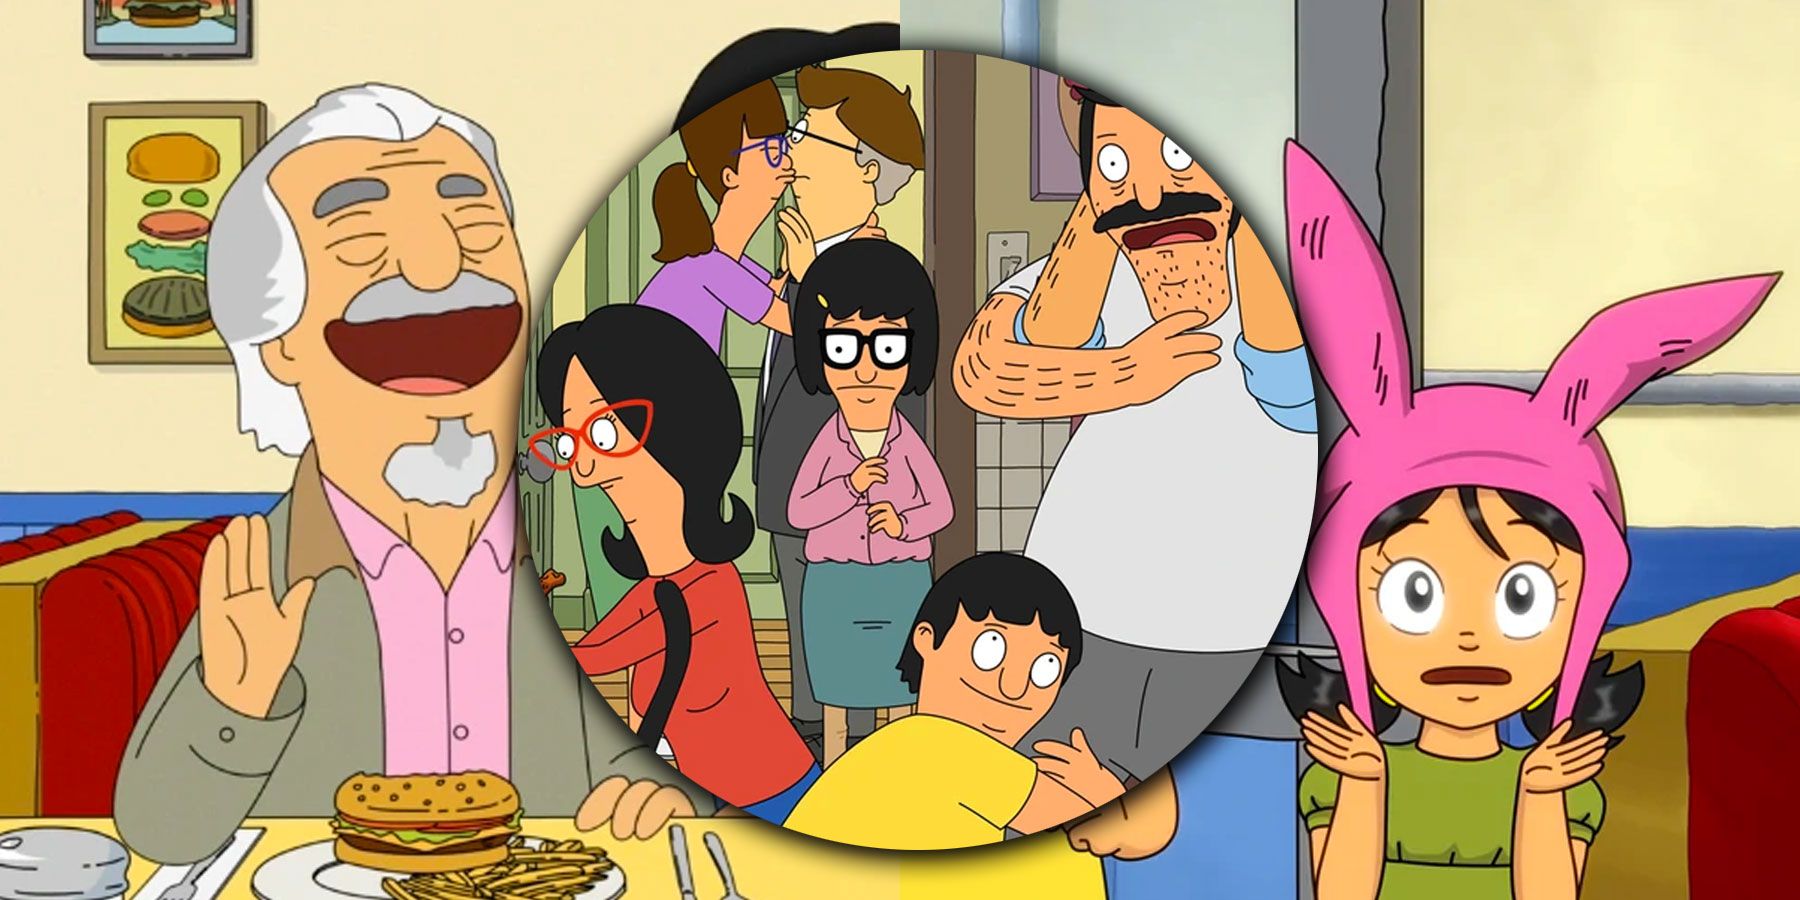 Bobs Burgers Season 8 premiere probably my favourite look from this  episode they all look so cute  rBobsBurgers